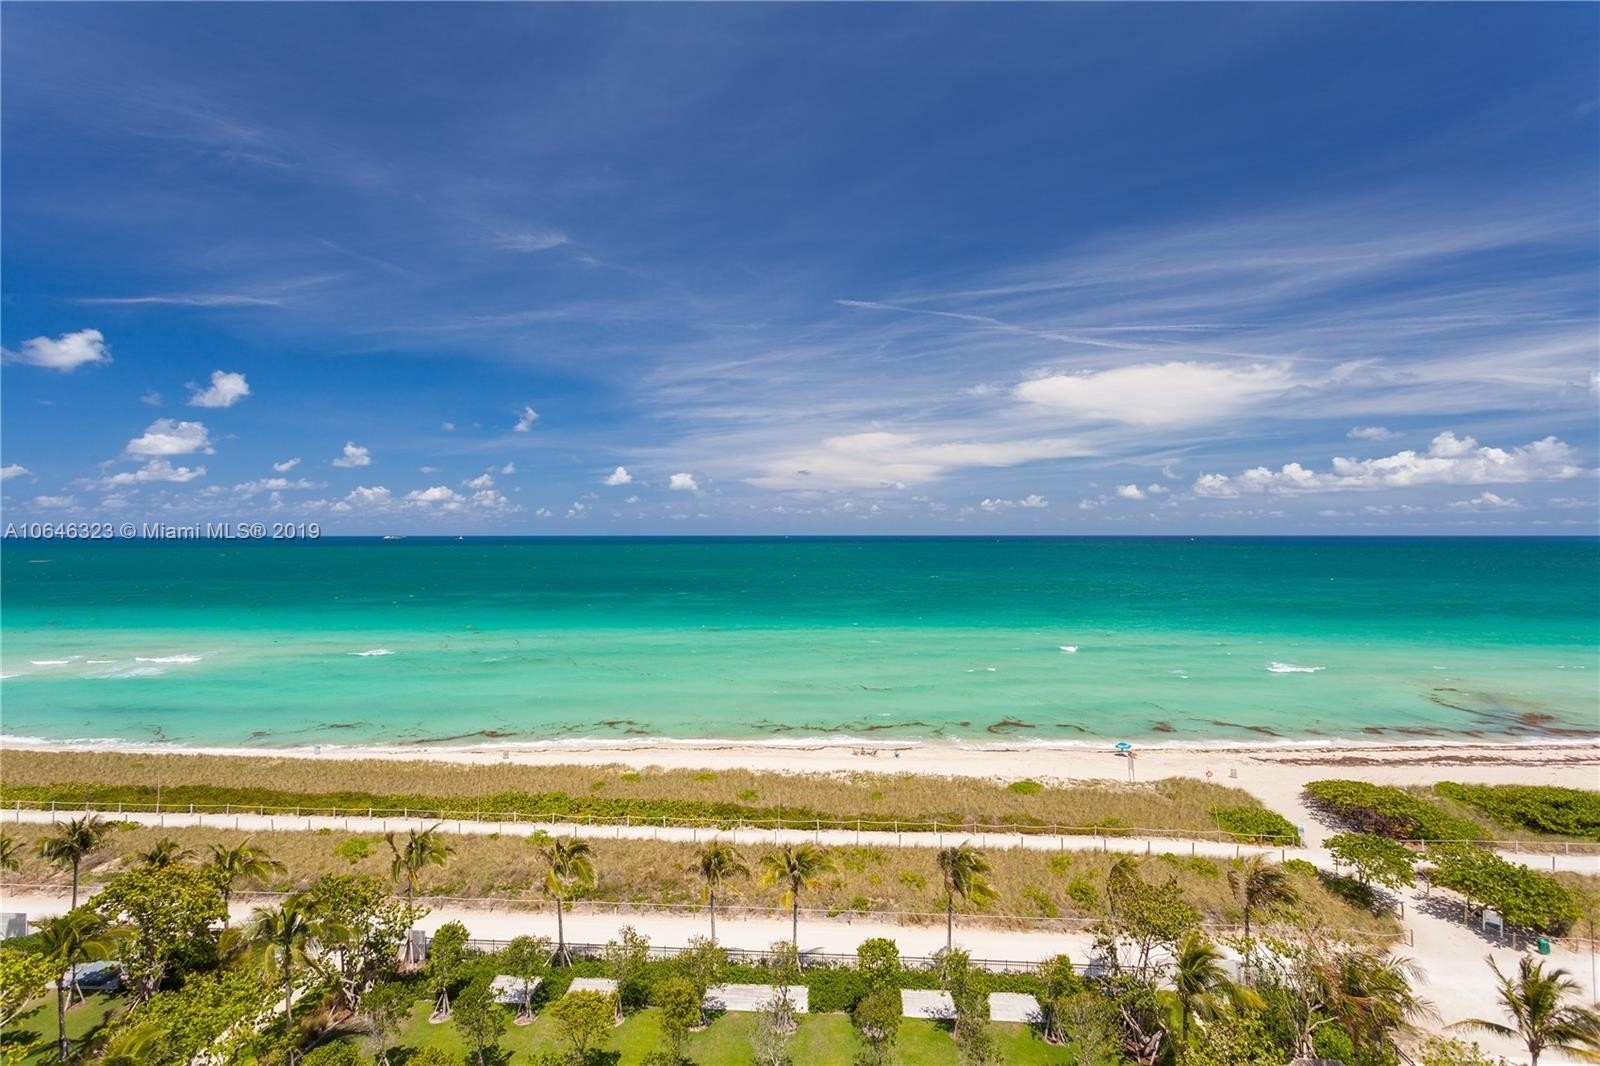 24. Condominiums at 9001 Collins Ave, S-801 Surfside